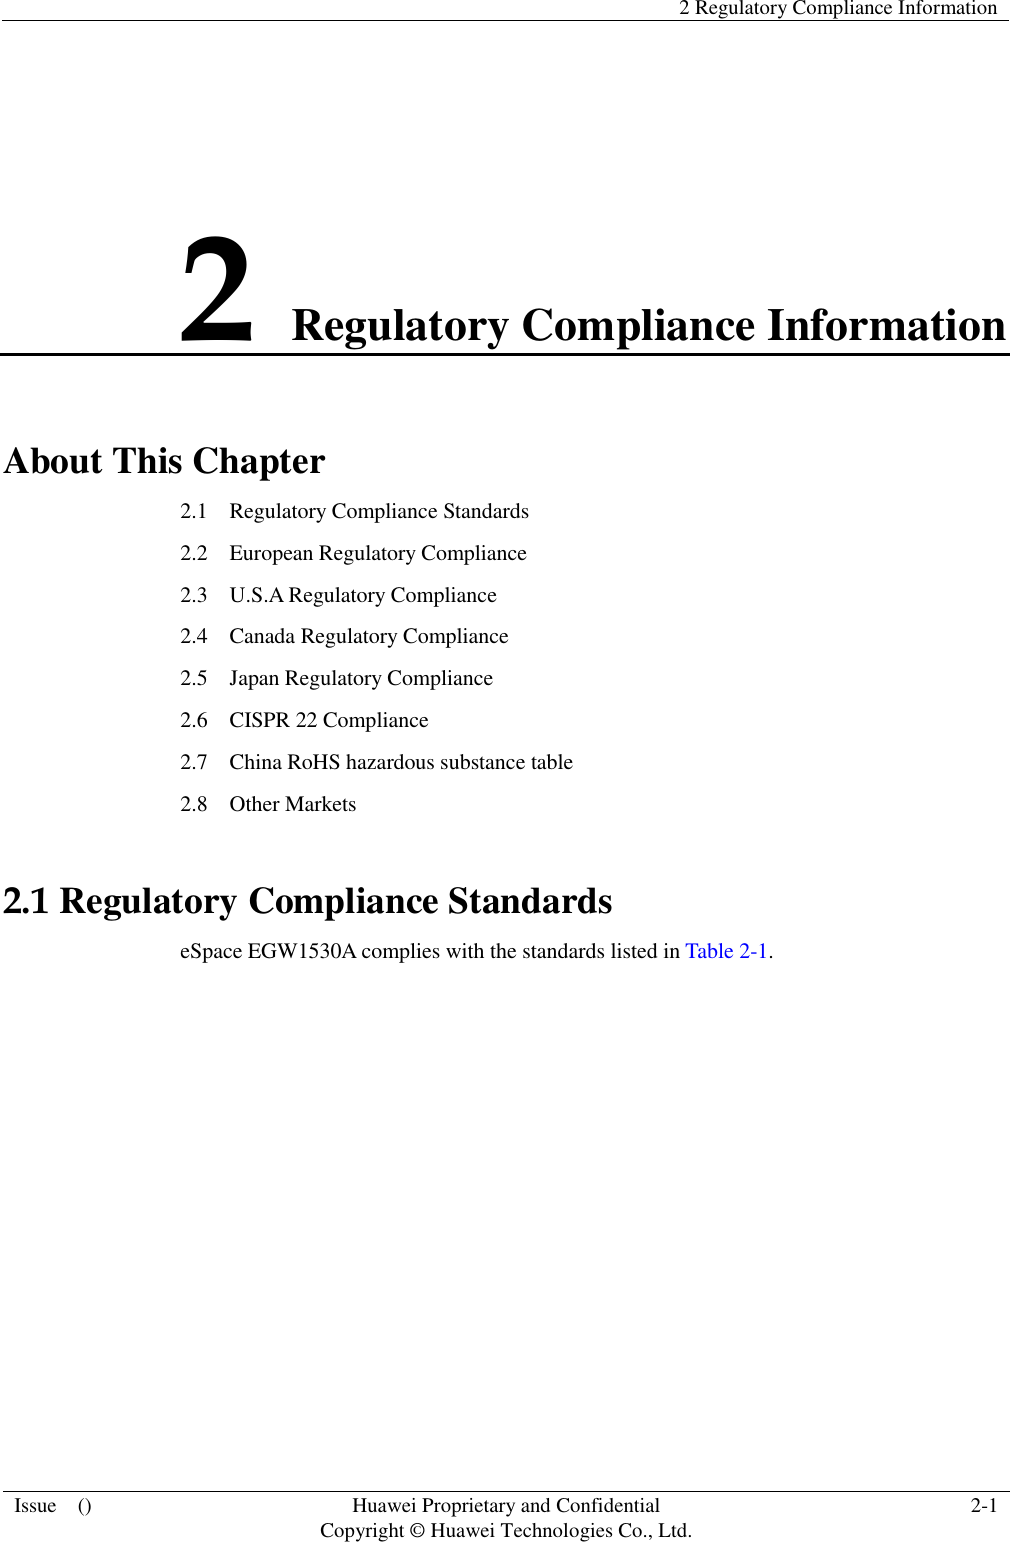   2 Regulatory Compliance Information  Issue    () Huawei Proprietary and Confidential                                     Copyright © Huawei Technologies Co., Ltd. 2-1  2 Regulatory Compliance Information About This Chapter 2.1    Regulatory Compliance Standards 2.2    European Regulatory Compliance 2.3    U.S.A Regulatory Compliance 2.4    Canada Regulatory Compliance 2.5  Japan Regulatory Compliance 2.6  CISPR 22 Compliance 2.7    China RoHS hazardous substance table 2.8    Other Markets 2.1 Regulatory Compliance Standards eSpace EGW1530A complies with the standards listed in Table 2-1. 